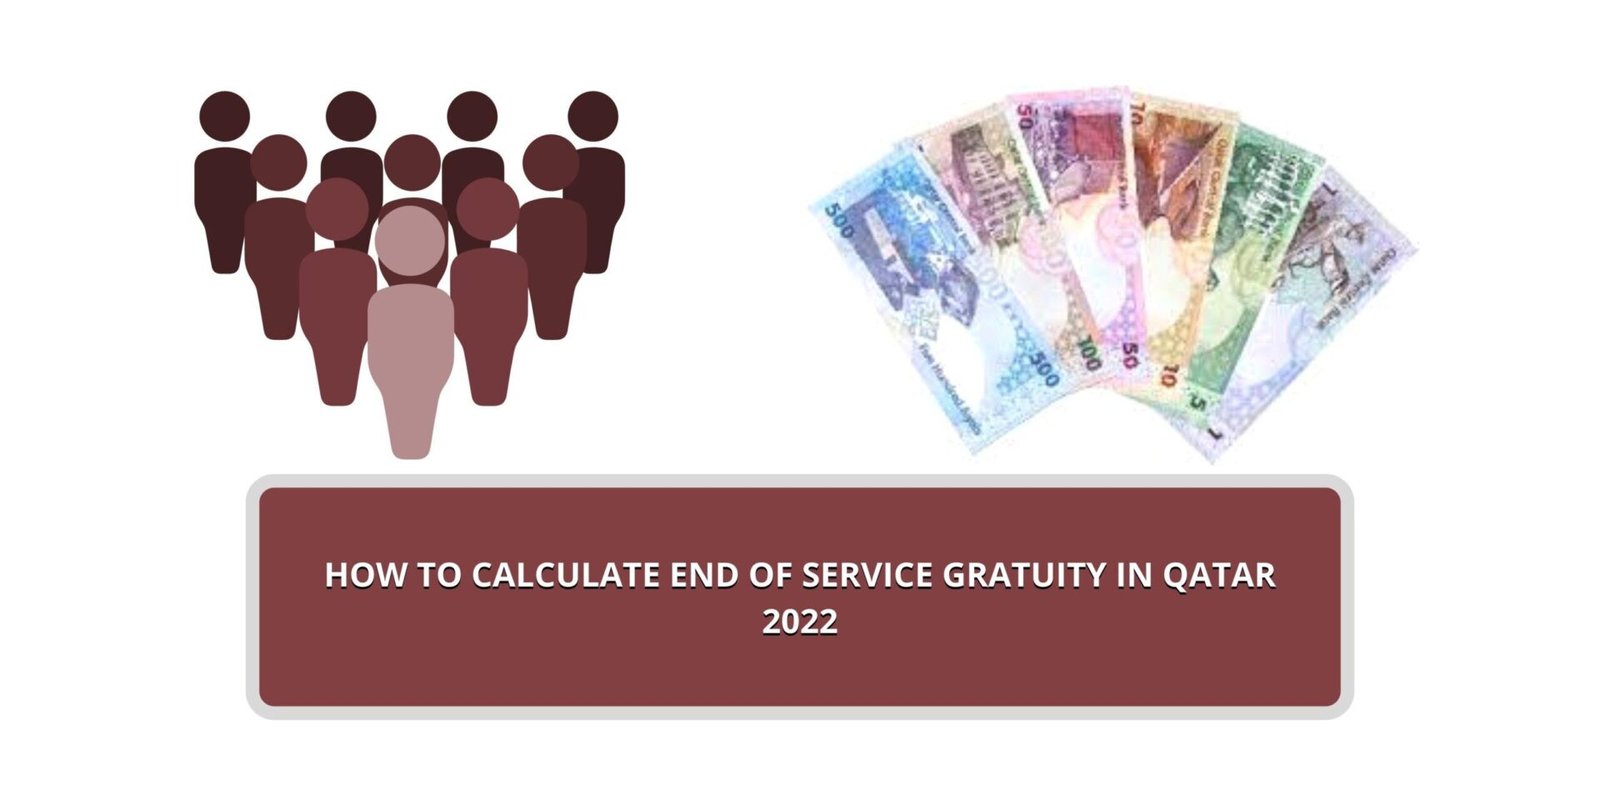 How To Calculate End Of Service Gratuity In Qatar 2022